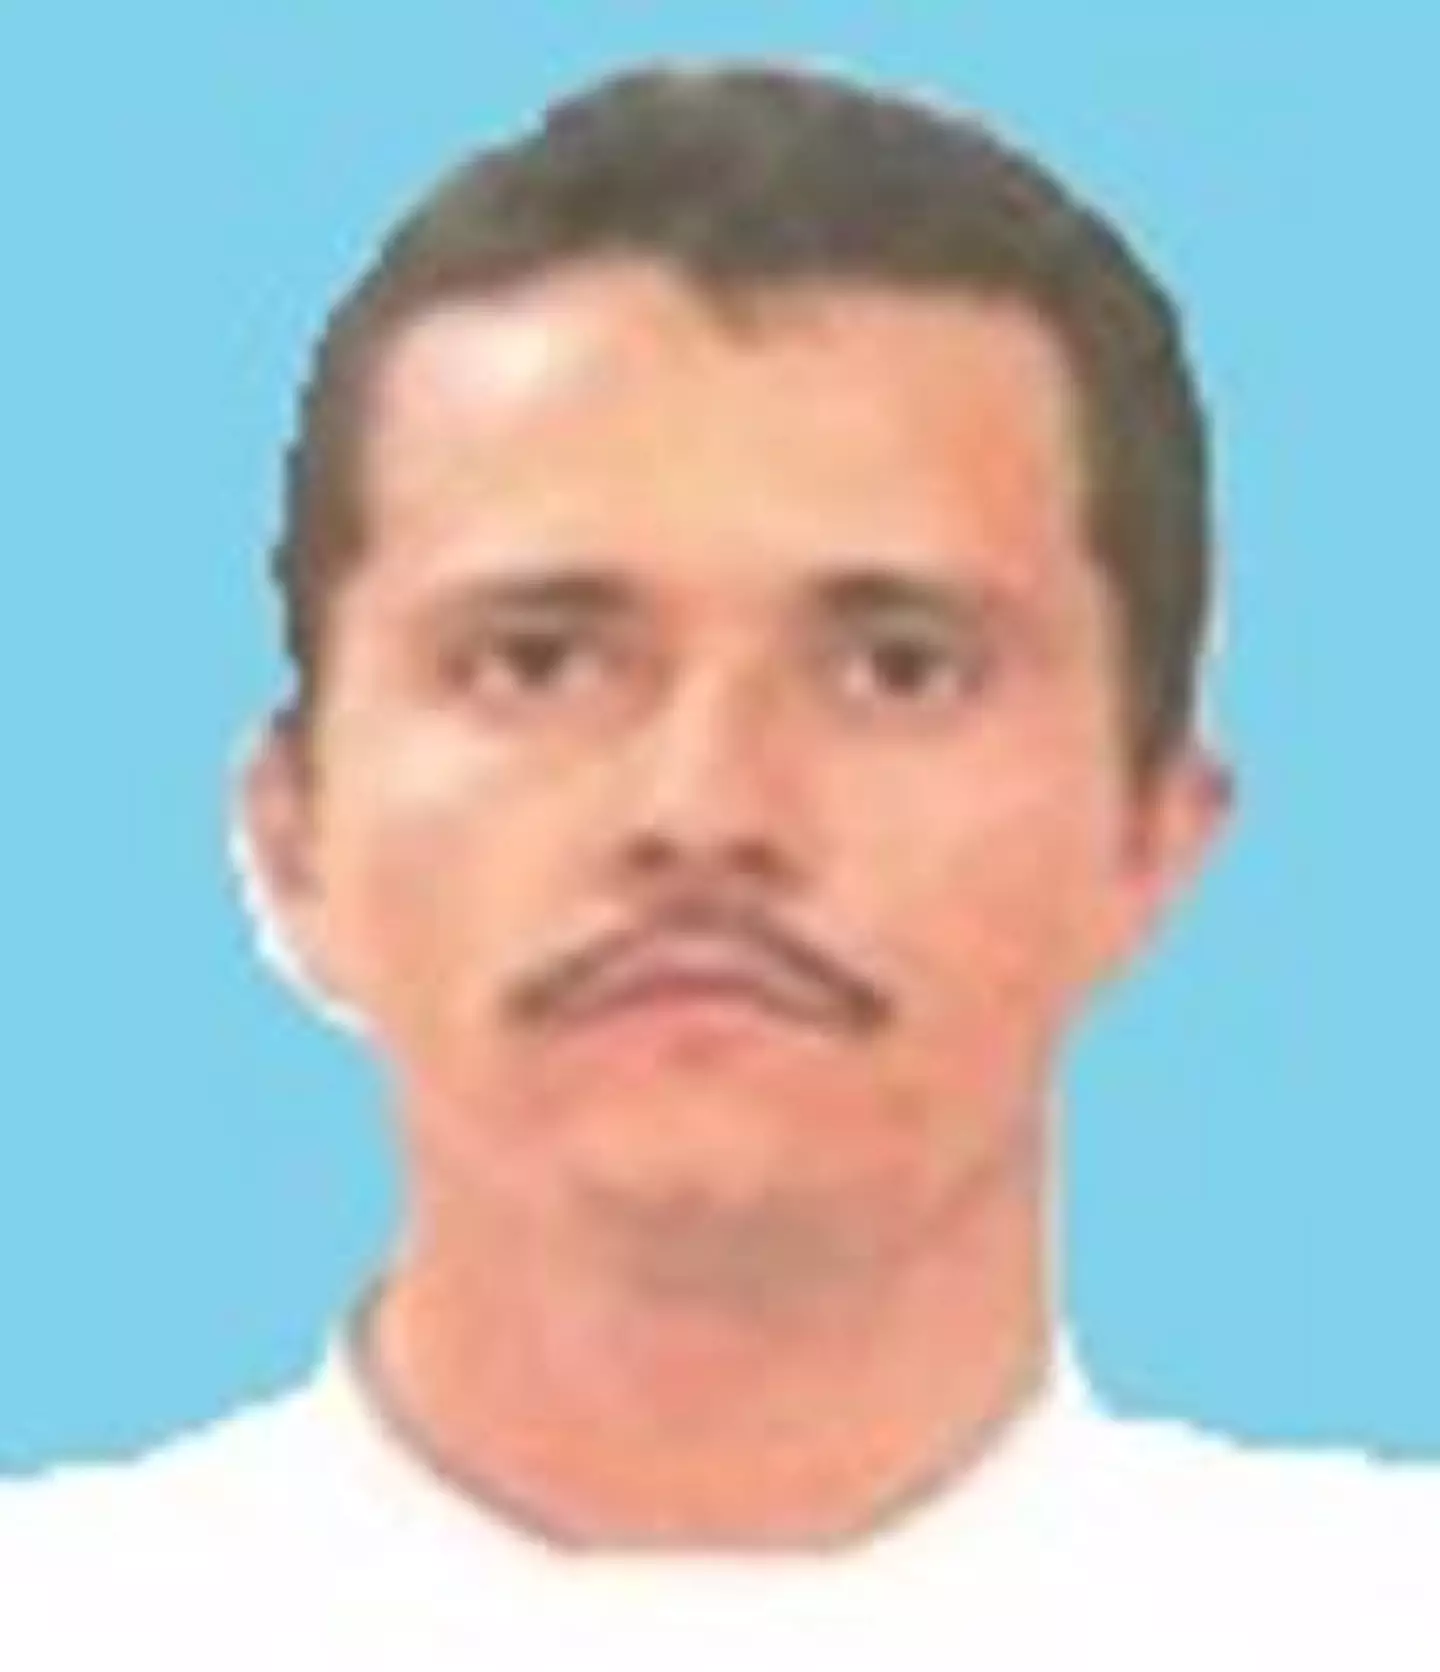 El Mencho is wanted by the US and Mexican governments.